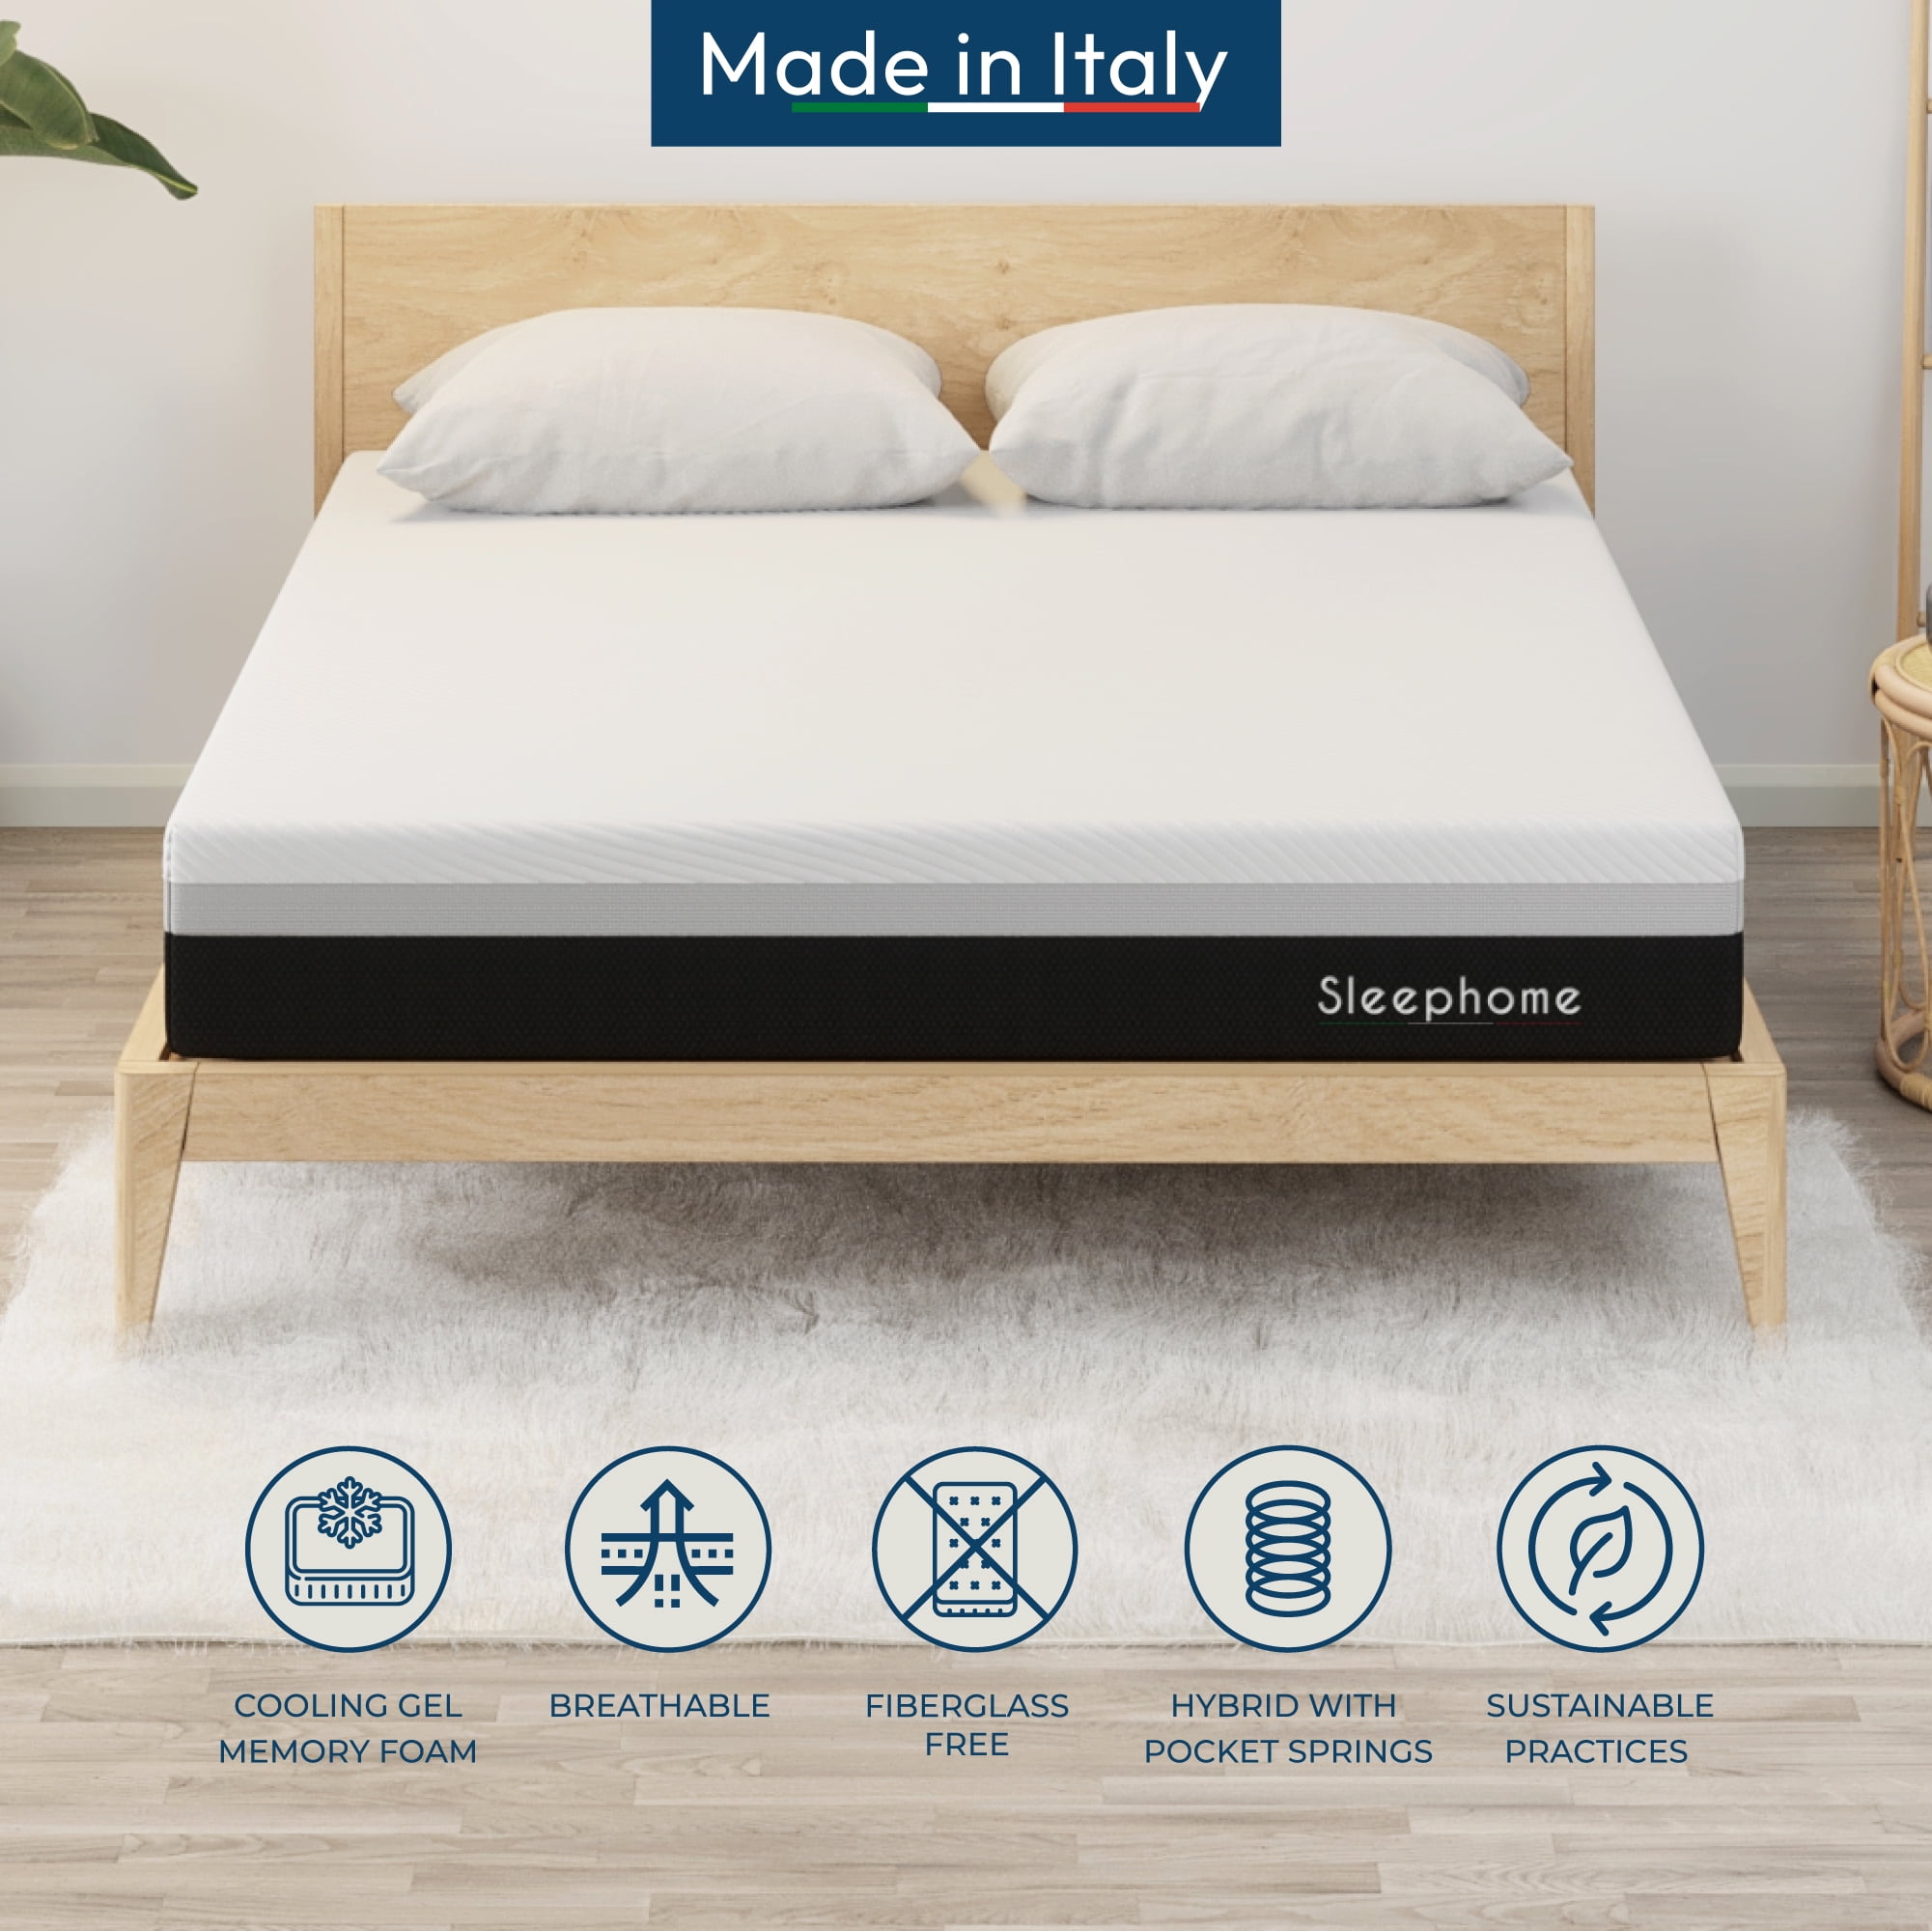 Firm Support Memory Foam Mattress in a Box from